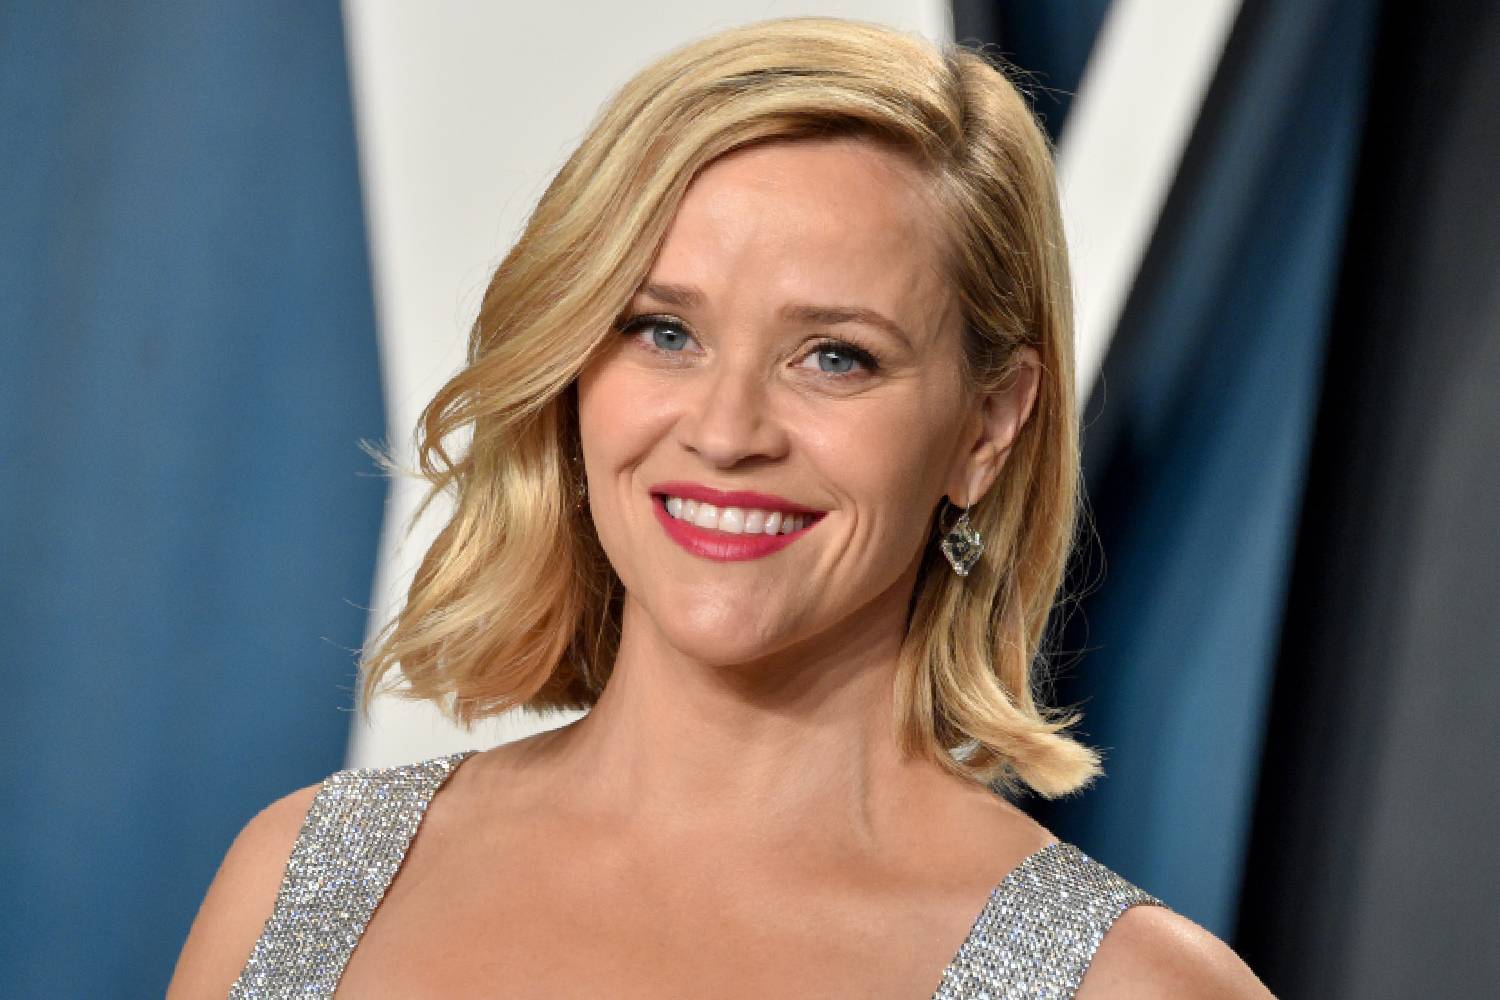 Reese Witherspoon Didn’t Want To Film This “Explicit” Sex Scene—But She Had No Choice